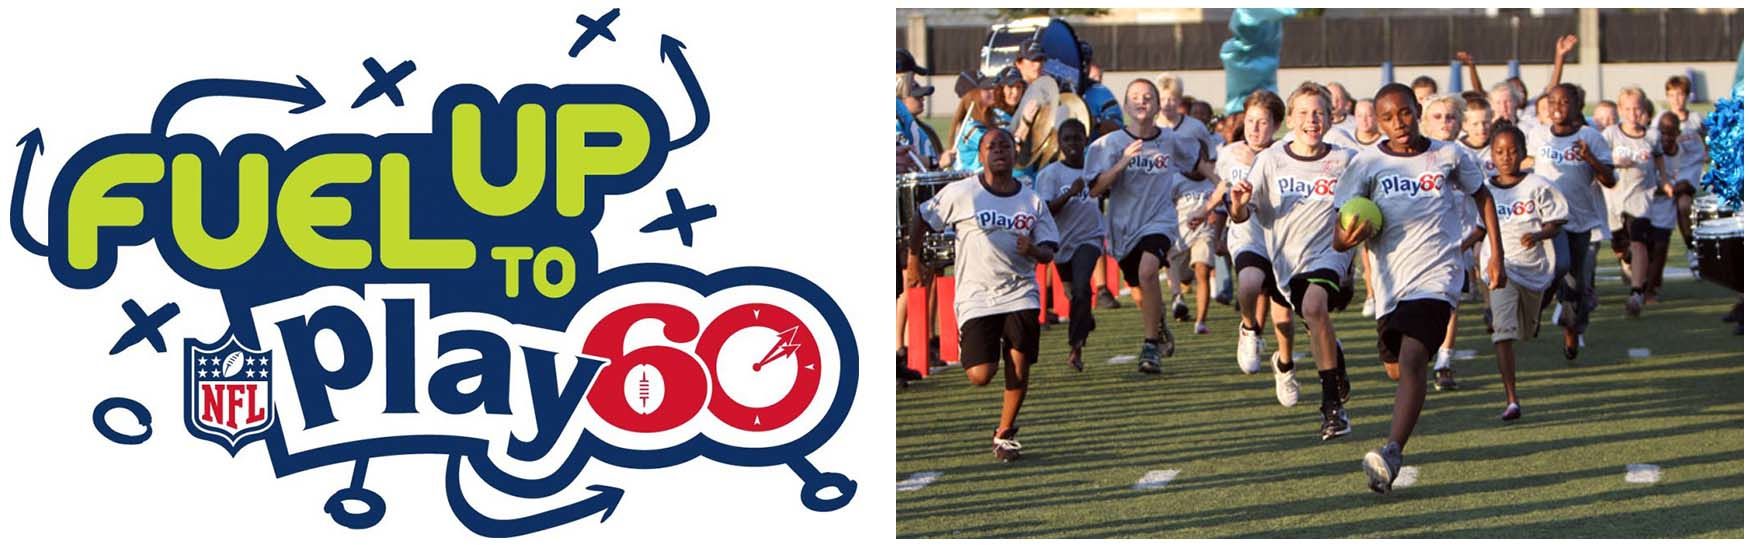 NFL Play 60 logo with kids running and playing football together